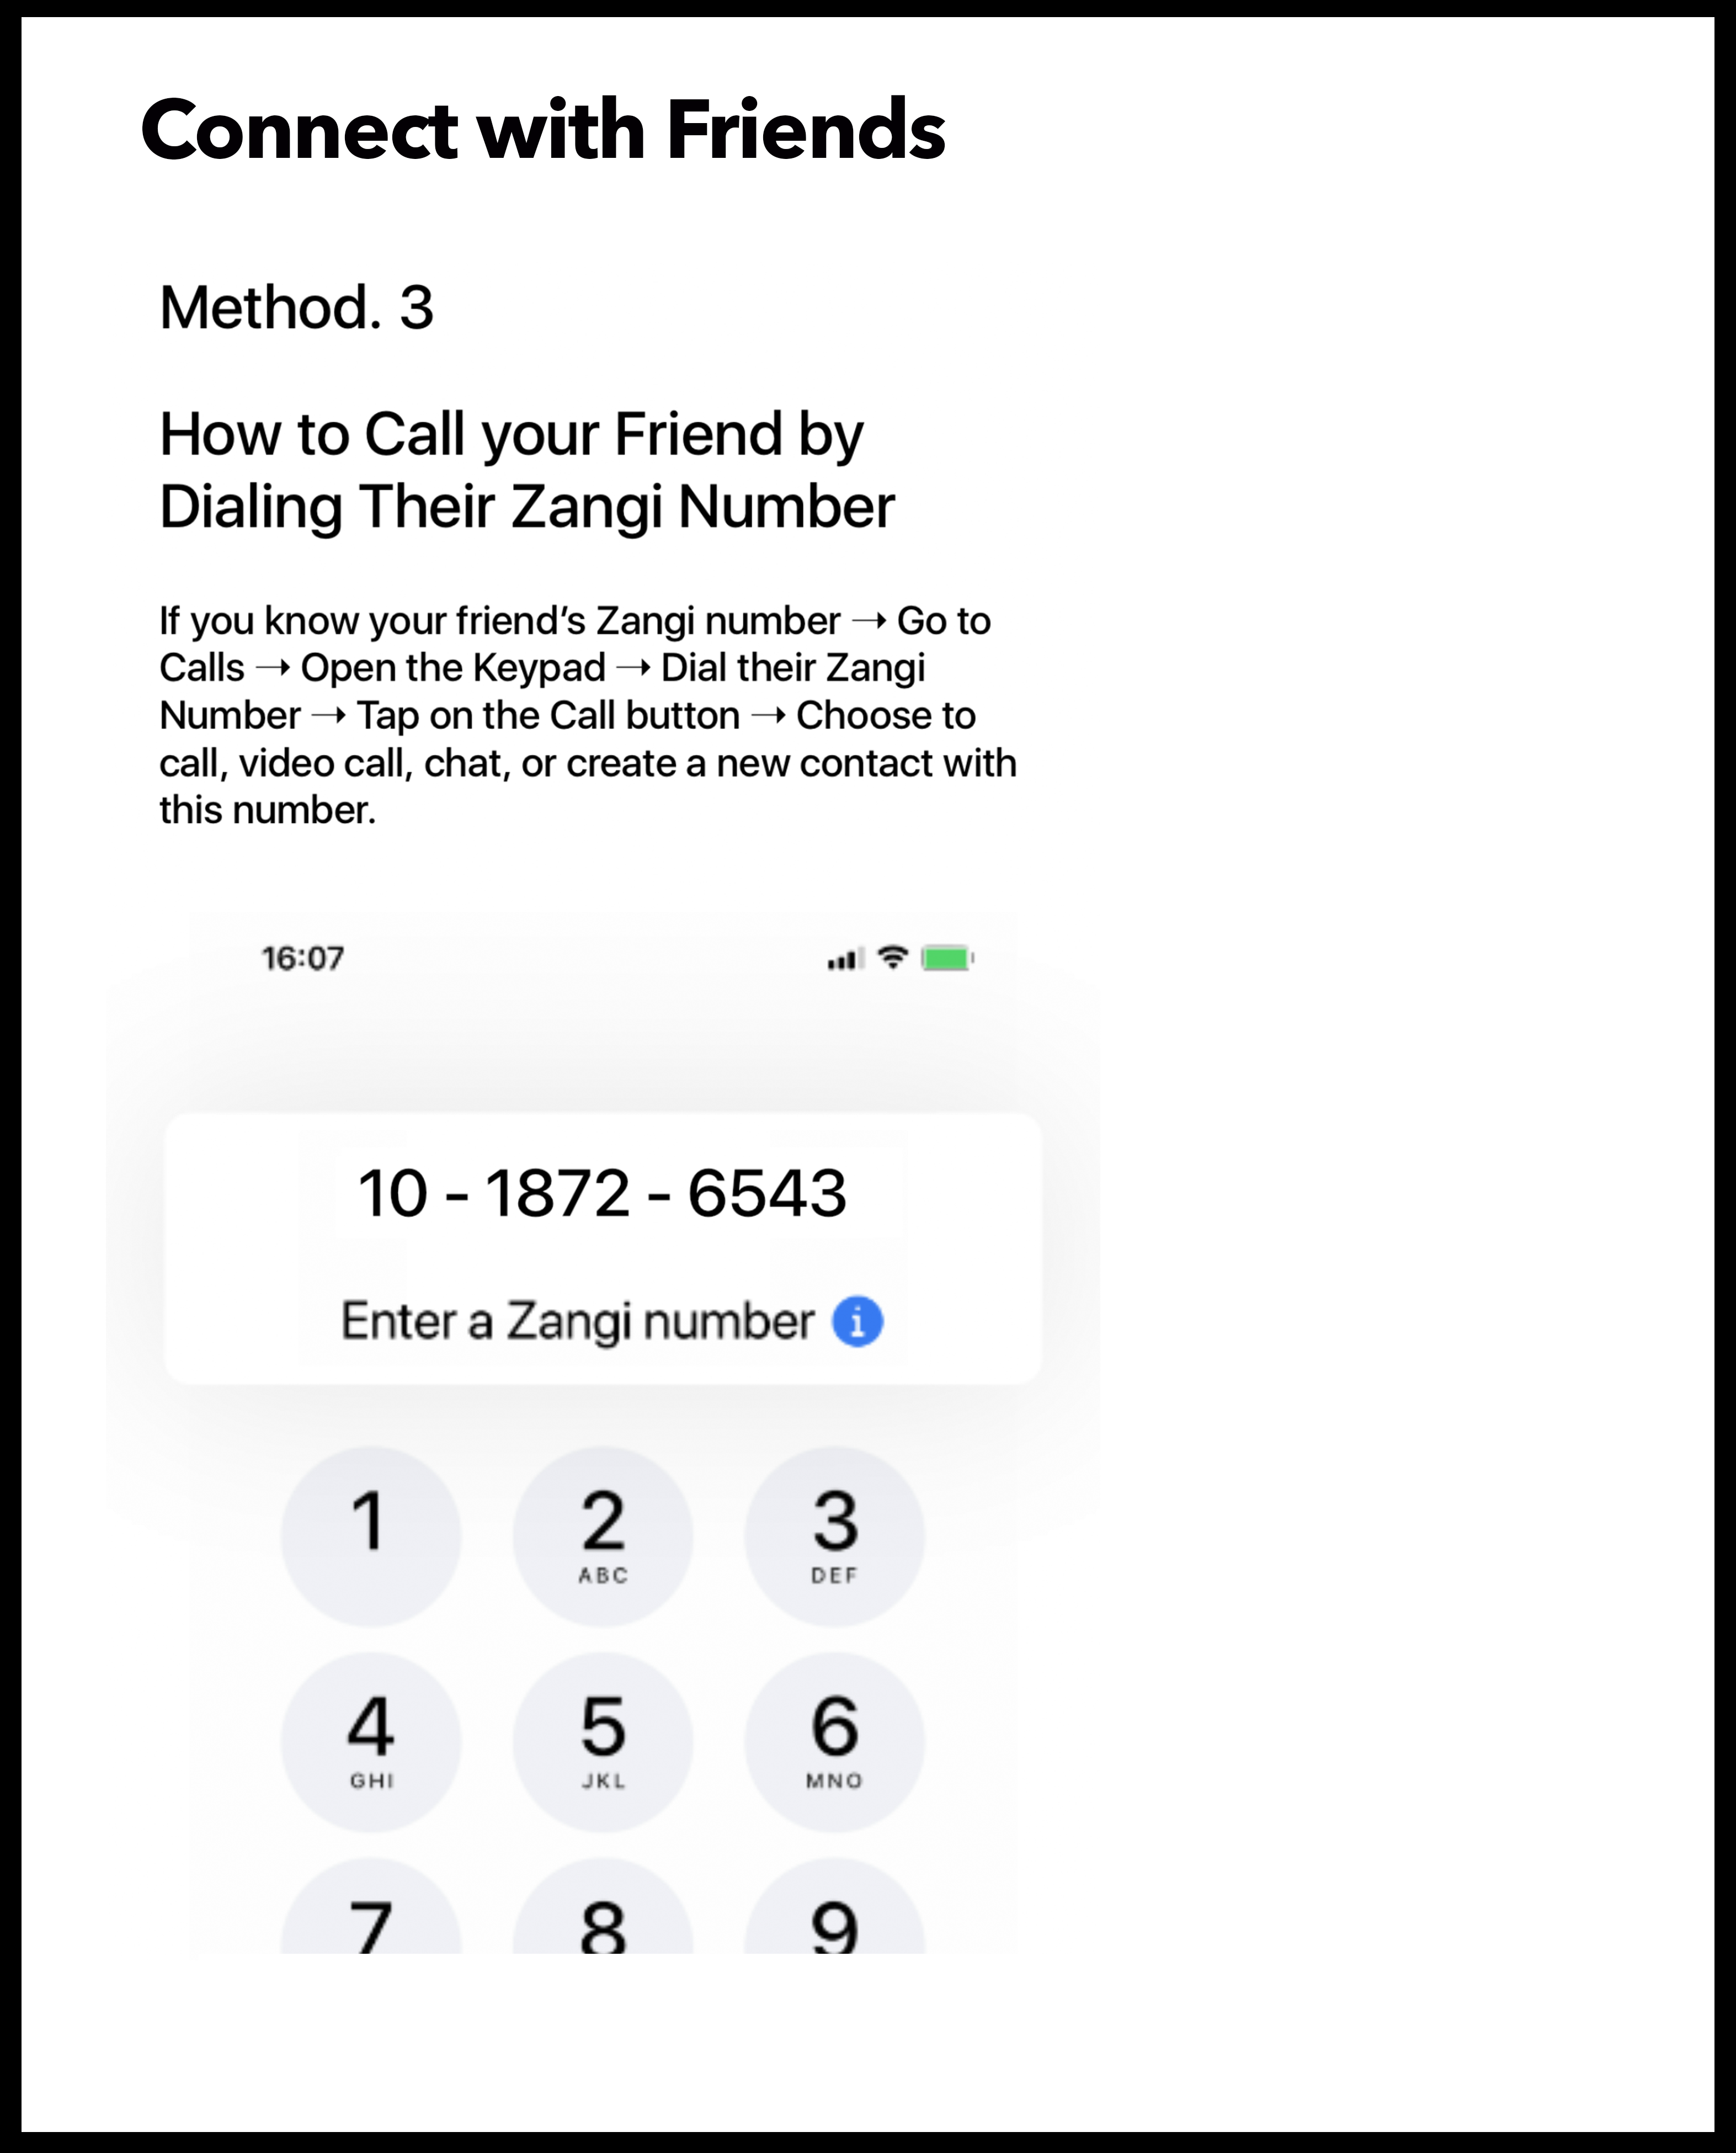 how to call your friends by dialing their zangi number